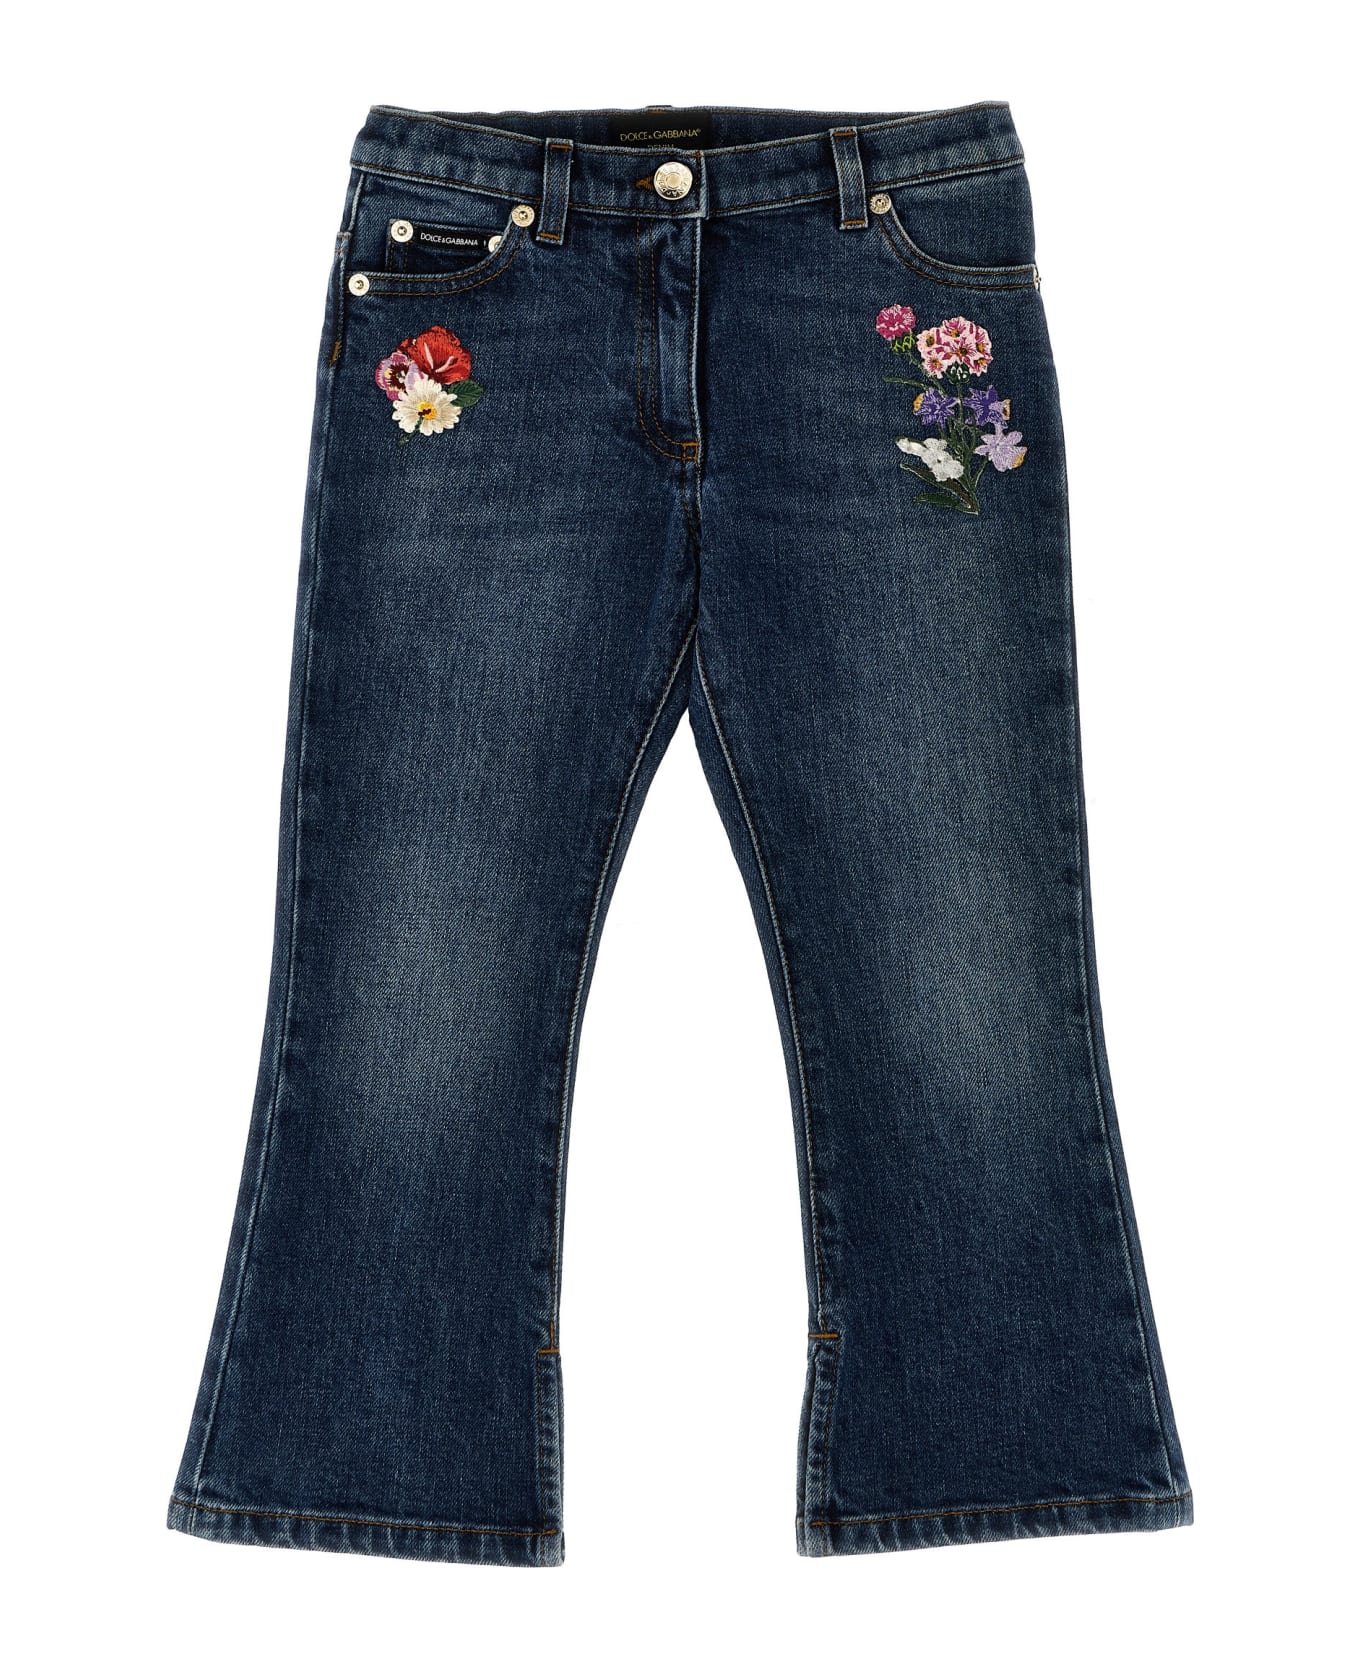 Dolce & Gabbana Embroidery Jeans - Blue ボトムス